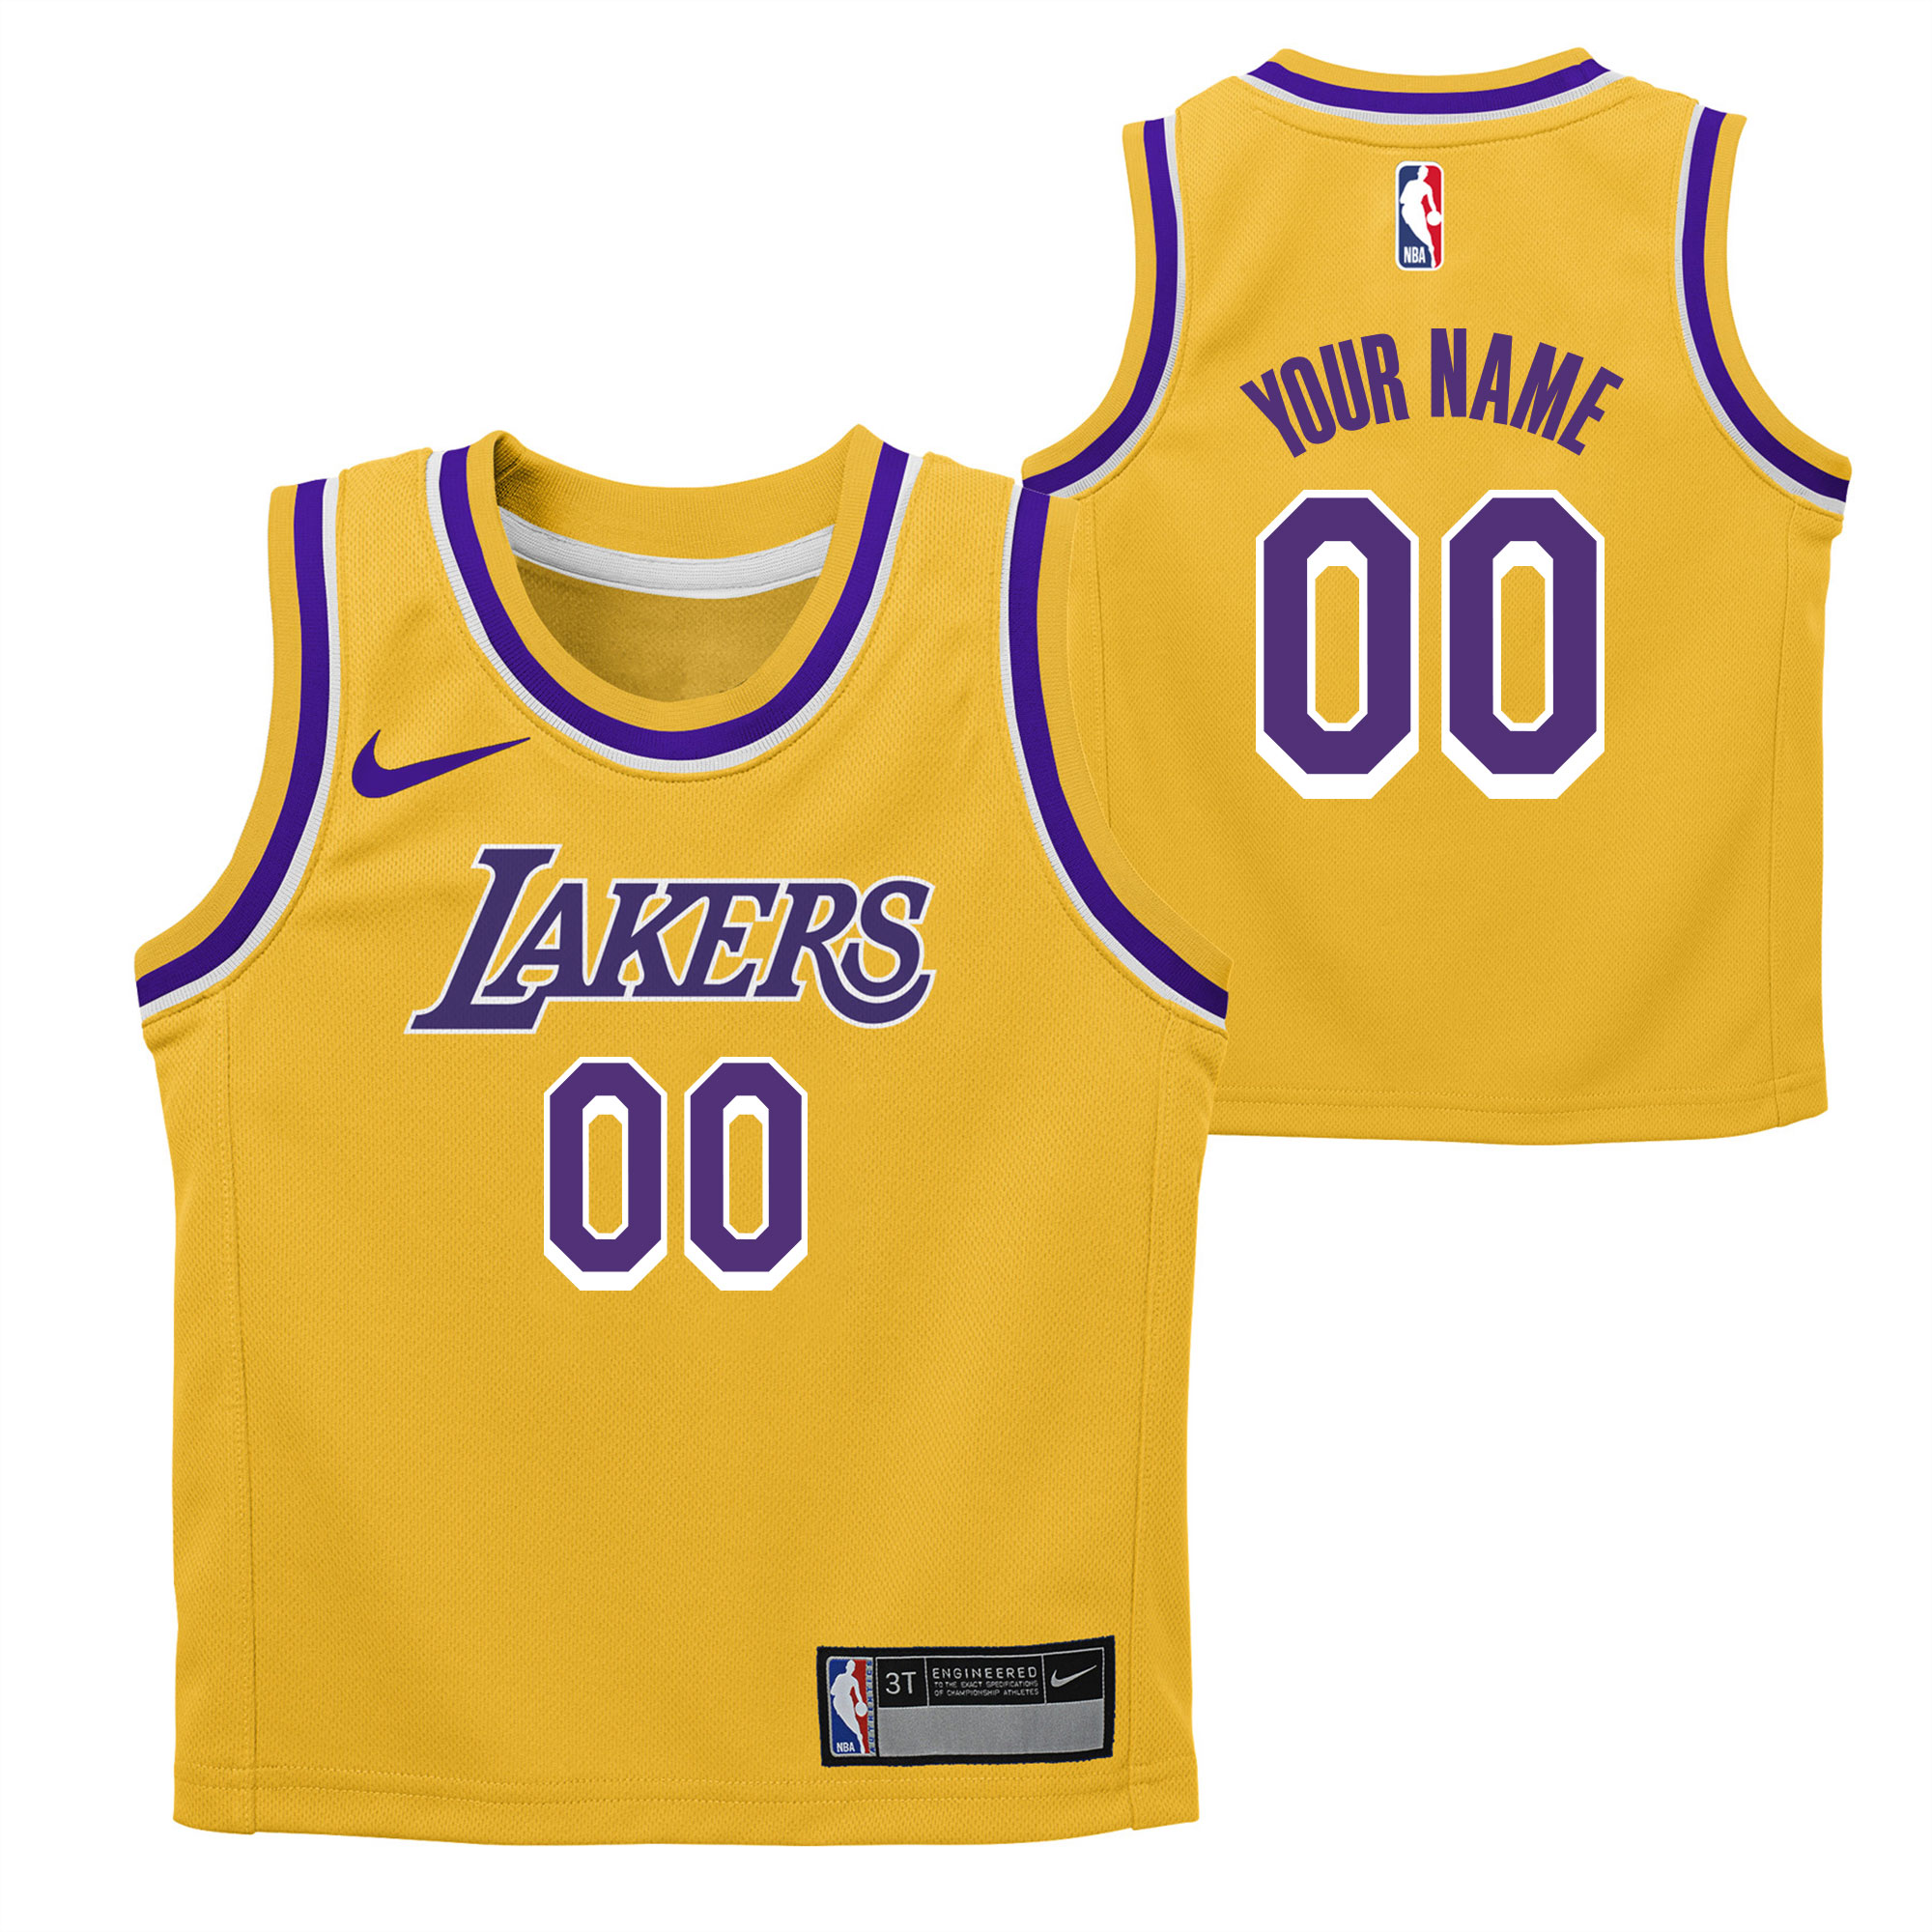 3t lakers jersey jersey on sale